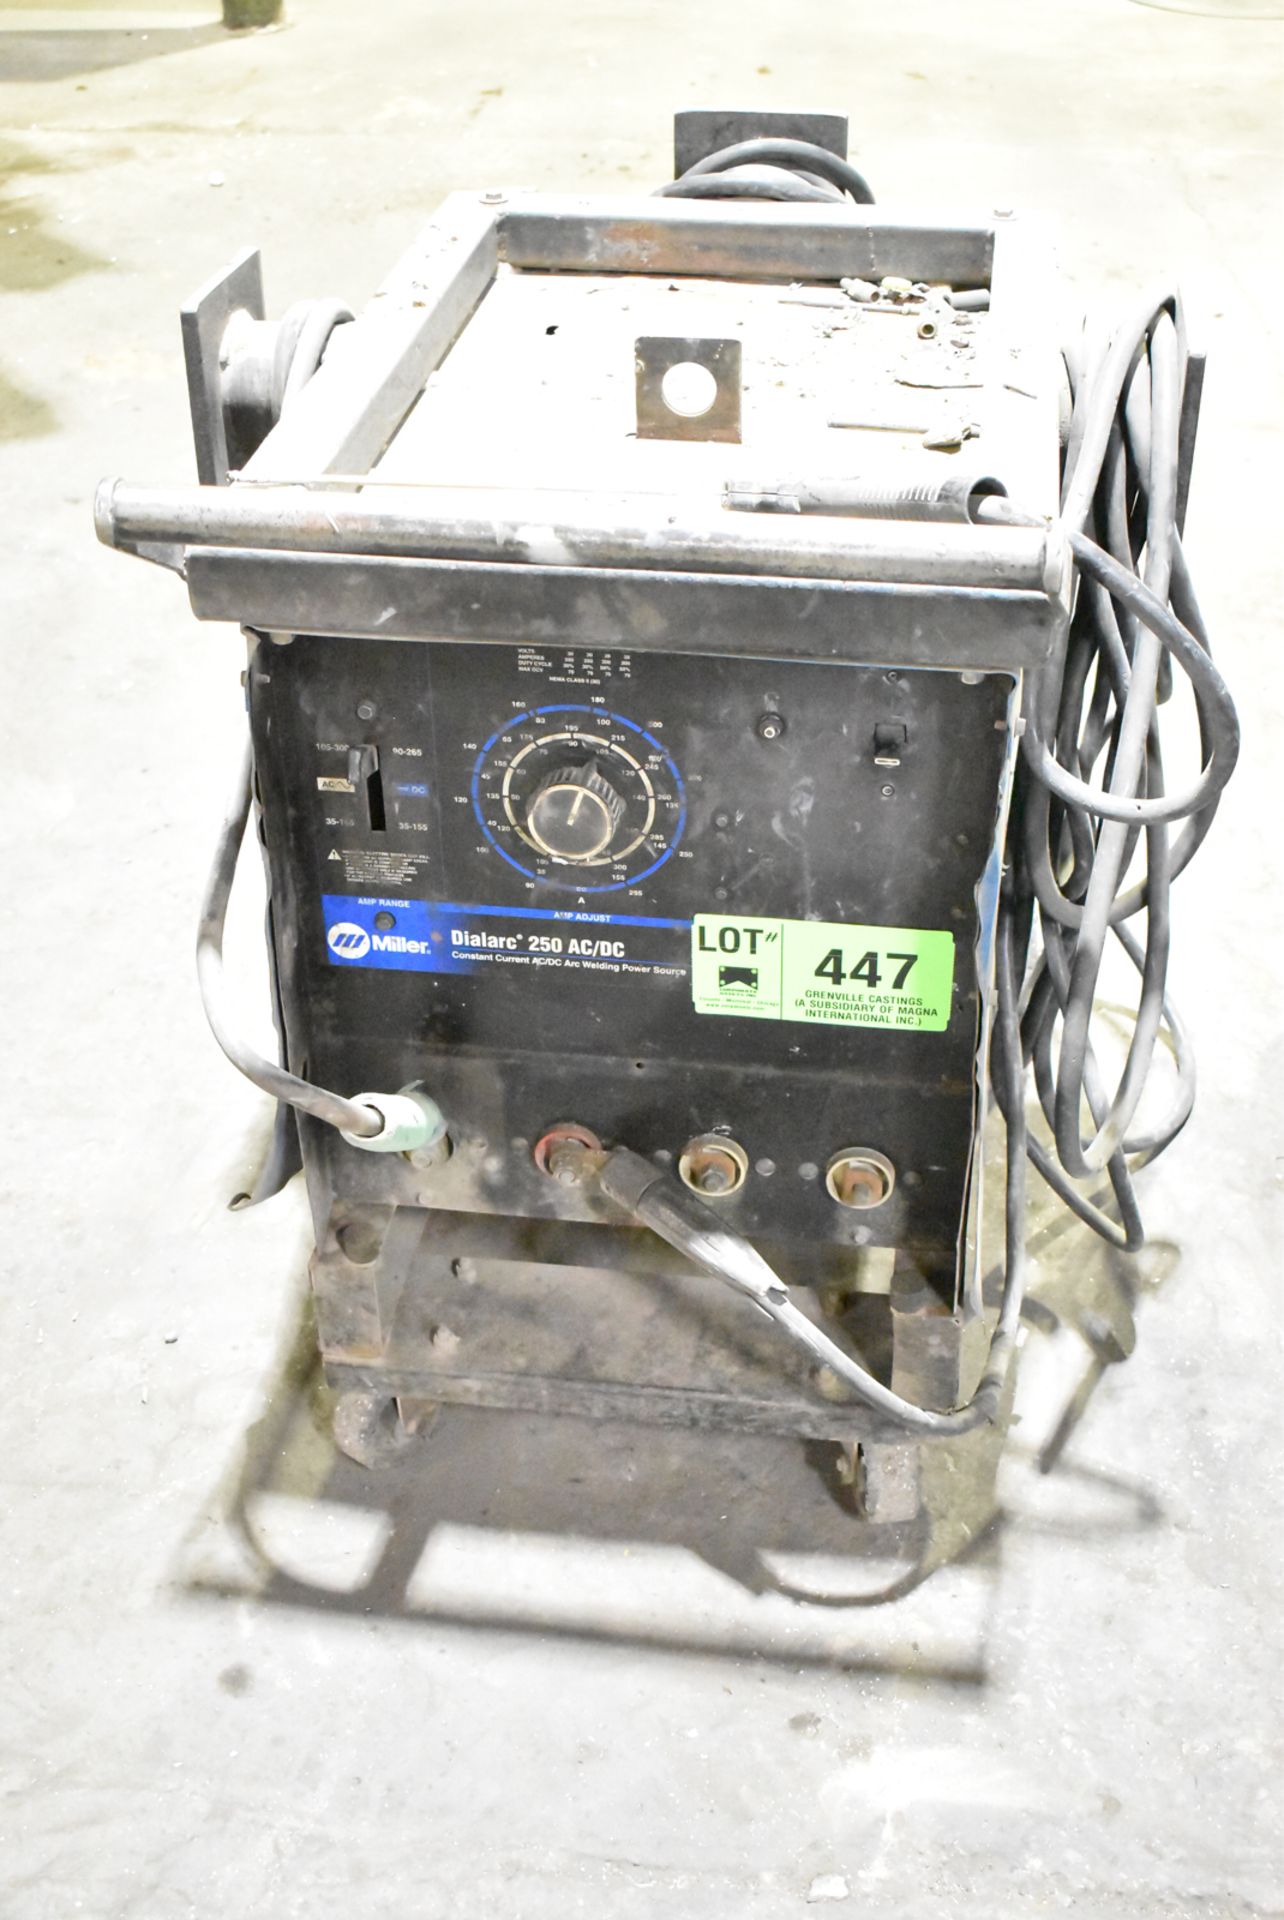 MILLER DIALARC 250 AC/DC ARC WELDER WITH CABLES & GUN, S/N N/A - Image 2 of 2